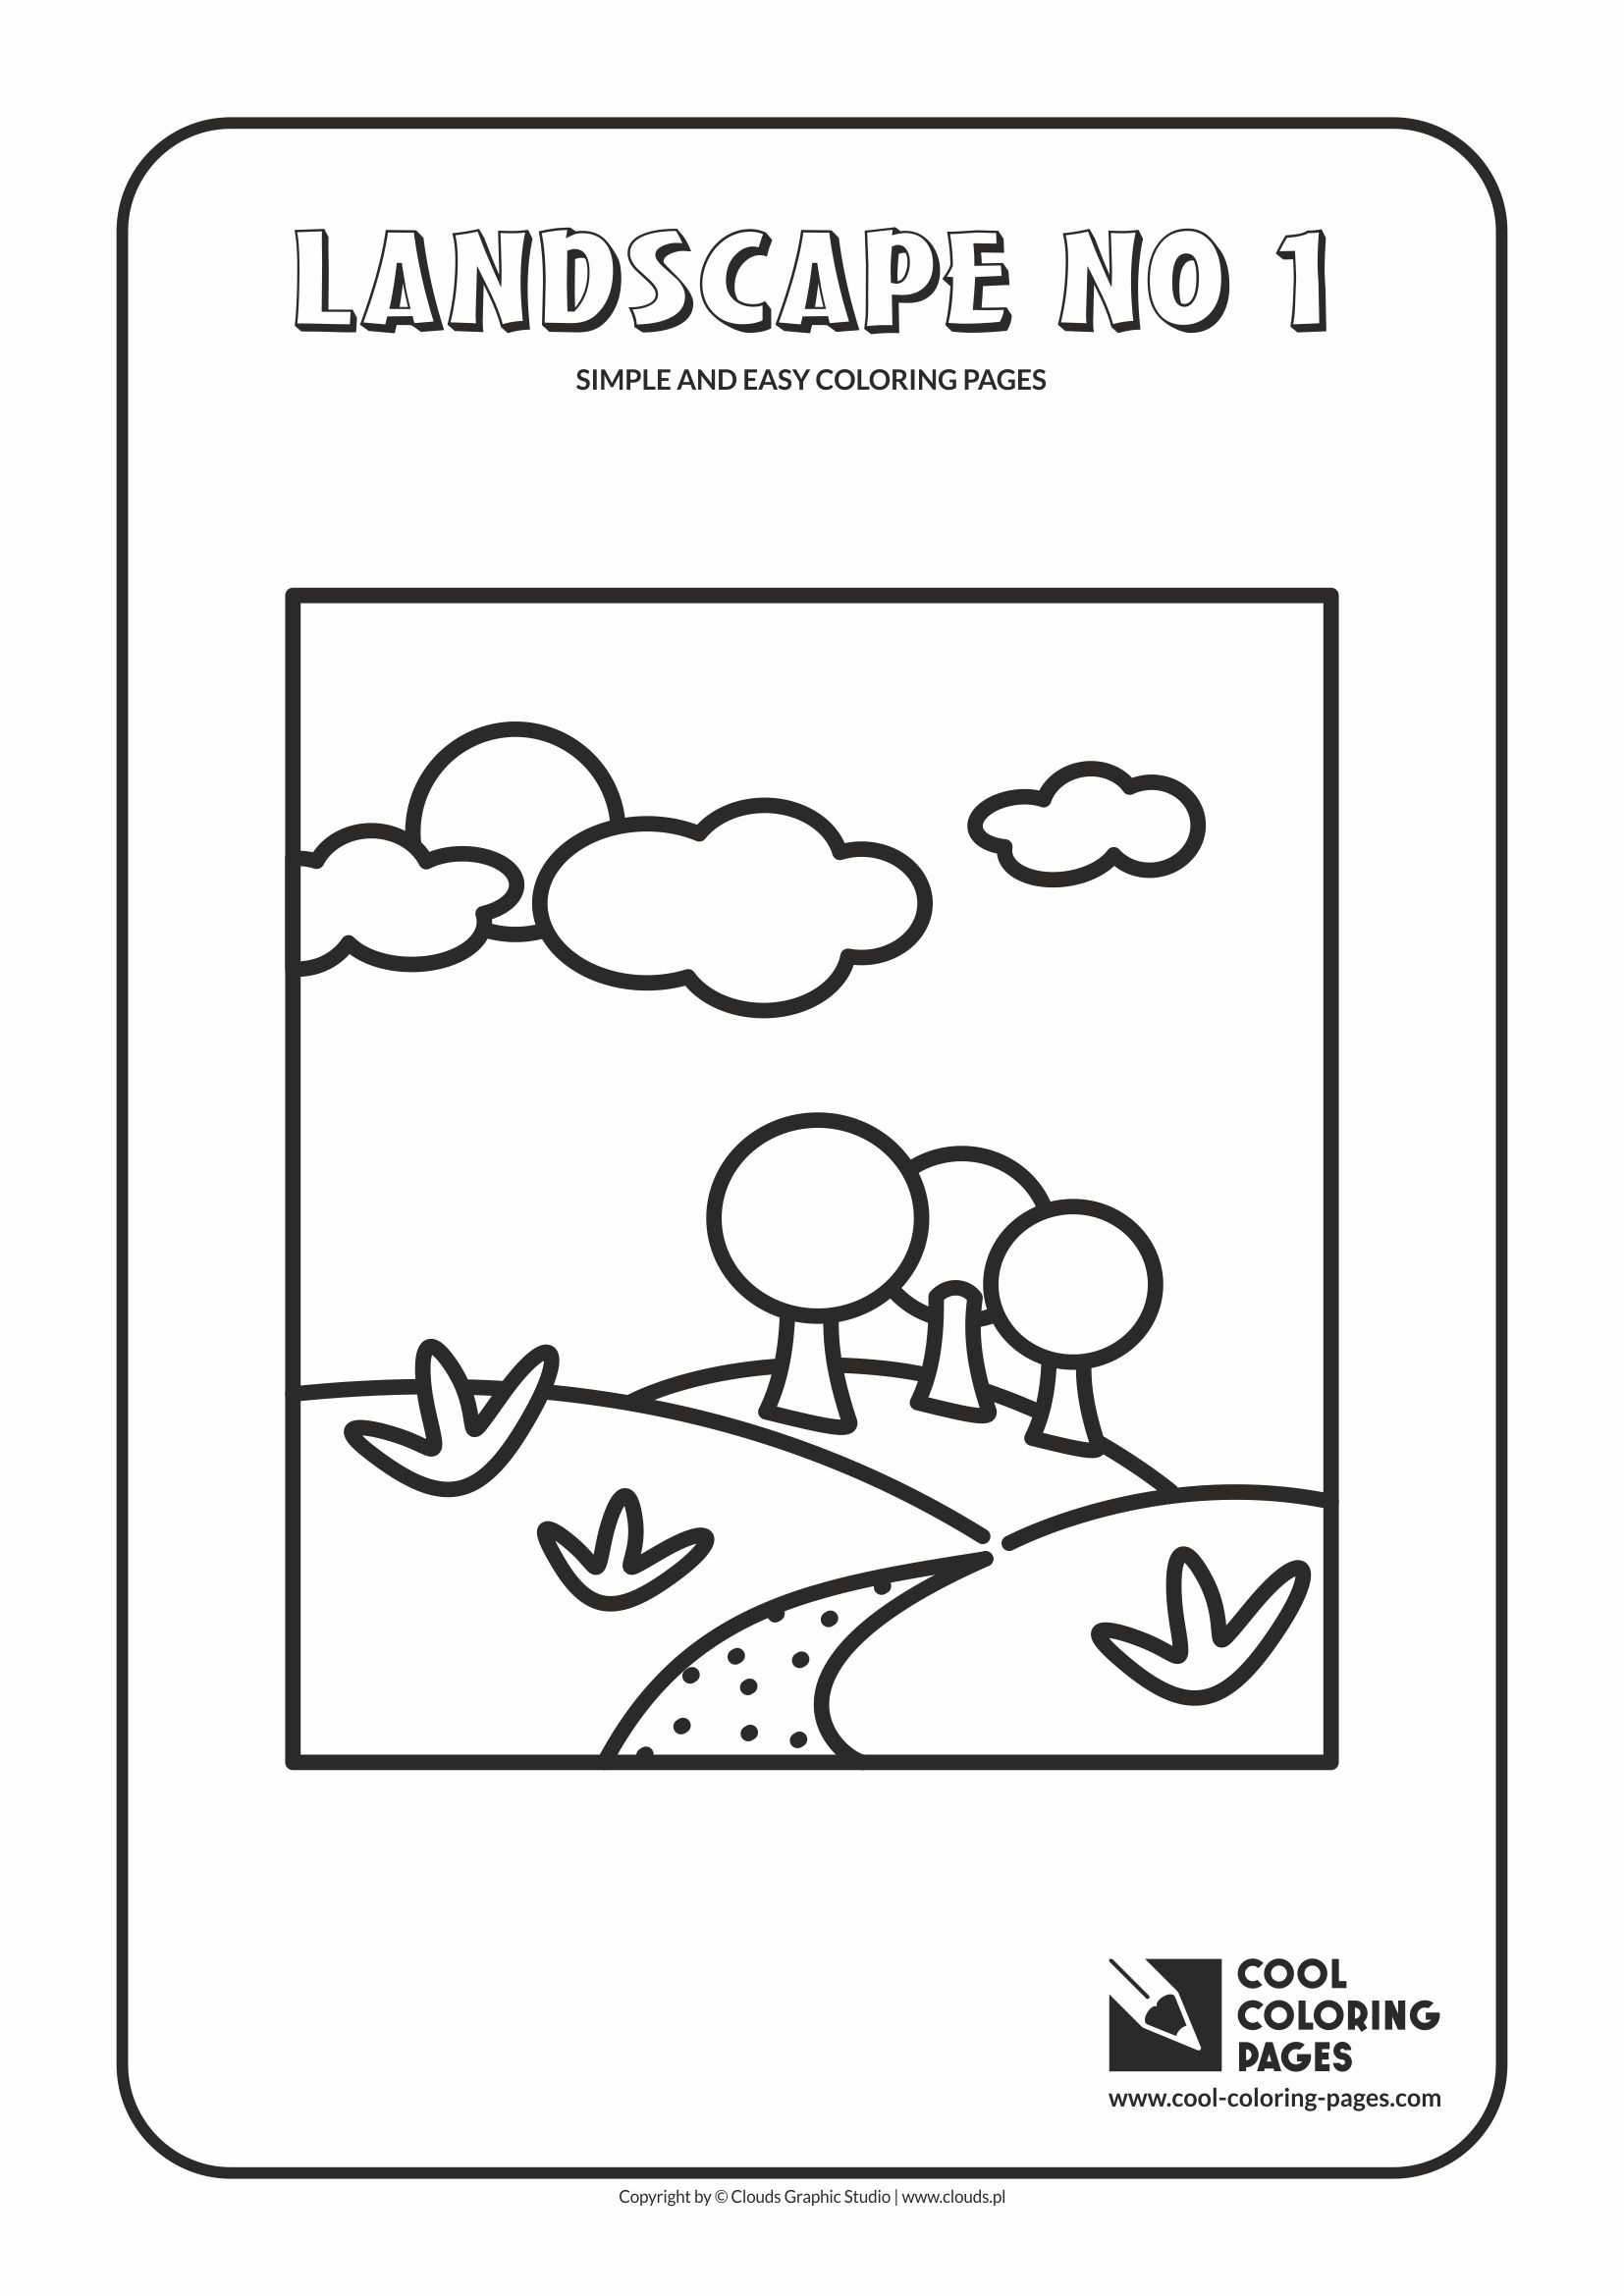 Simple and easy coloring pages for toddlers - Landscape no 1